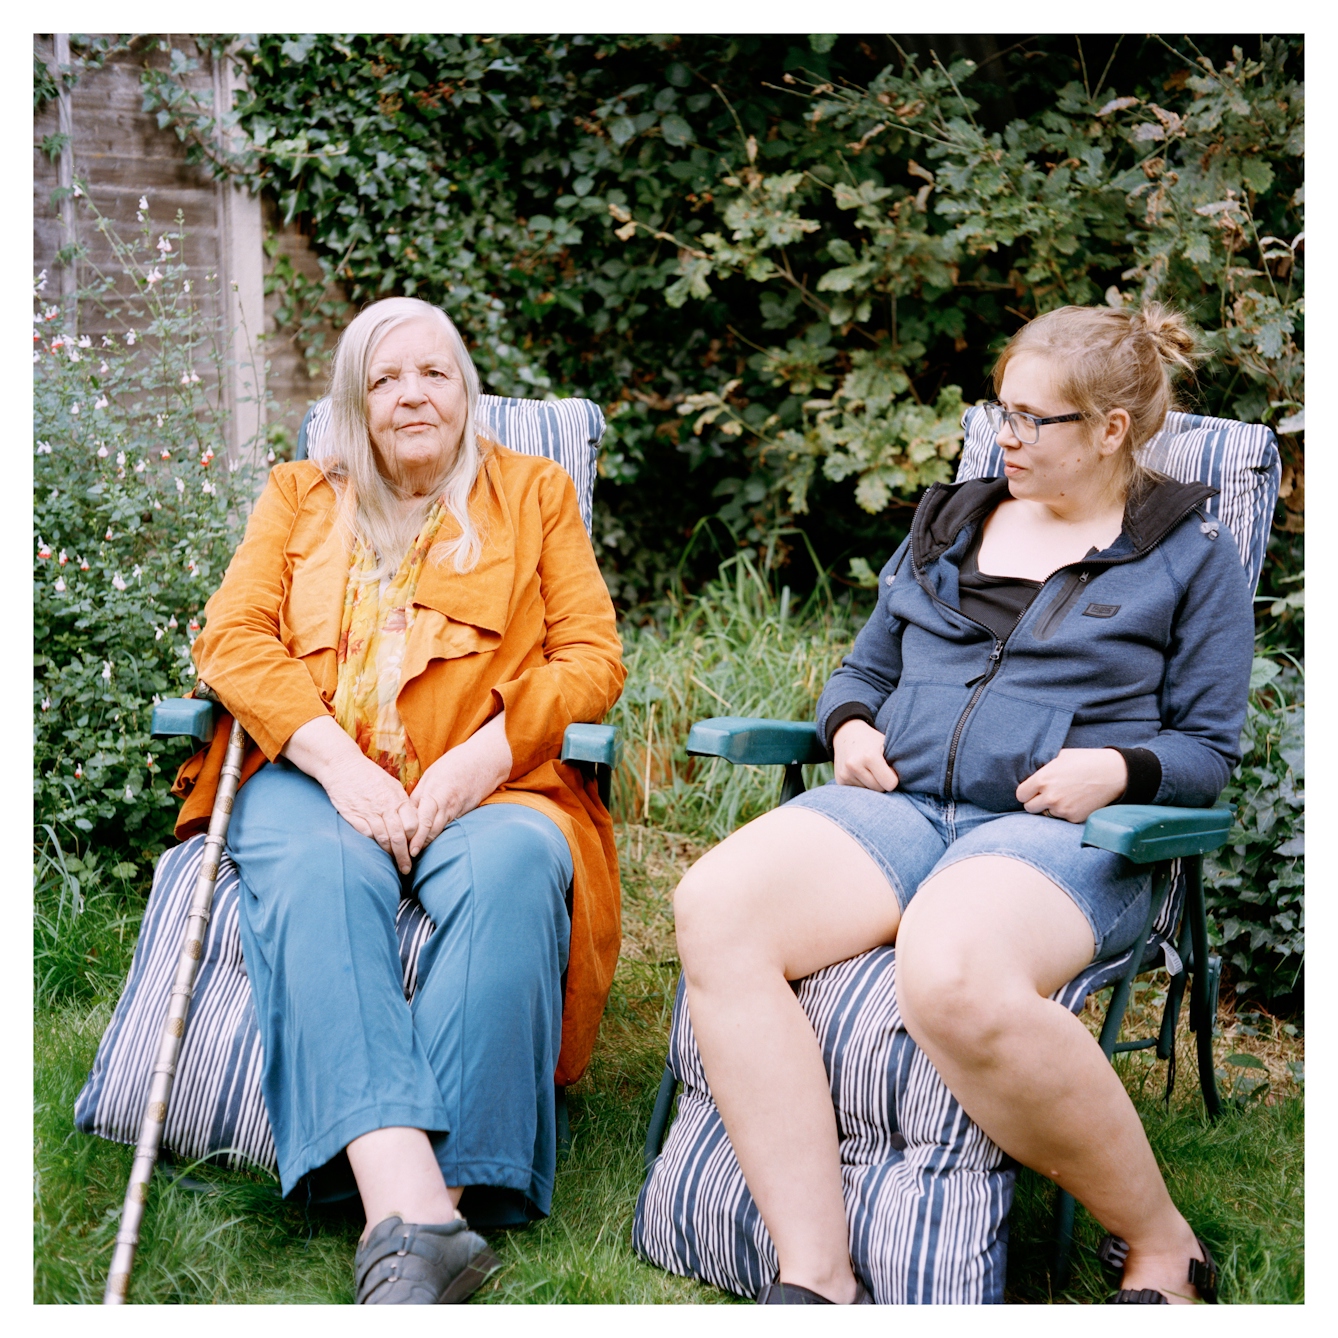 Portrait photograph of two women, Alison and Lex, sitting close to one another on plastic garden chairs in an outdoor setting. Alison is a woman with long grey hair, wearing blue trousers, a patterned top and an orange jacket. She has a silver walking stick which is leaning against the edge of her chair. She is looking at the camera. Lexy is sat beside her. She has blonde hair tied in a bun. She is wearing a blue zipped jumper, denim shorts and a black t-shirt. She is looking at Alison and smiling slightly, the corner of her lips are turned upwards. Behind them are are some trees and small plants, along a brick wall. 